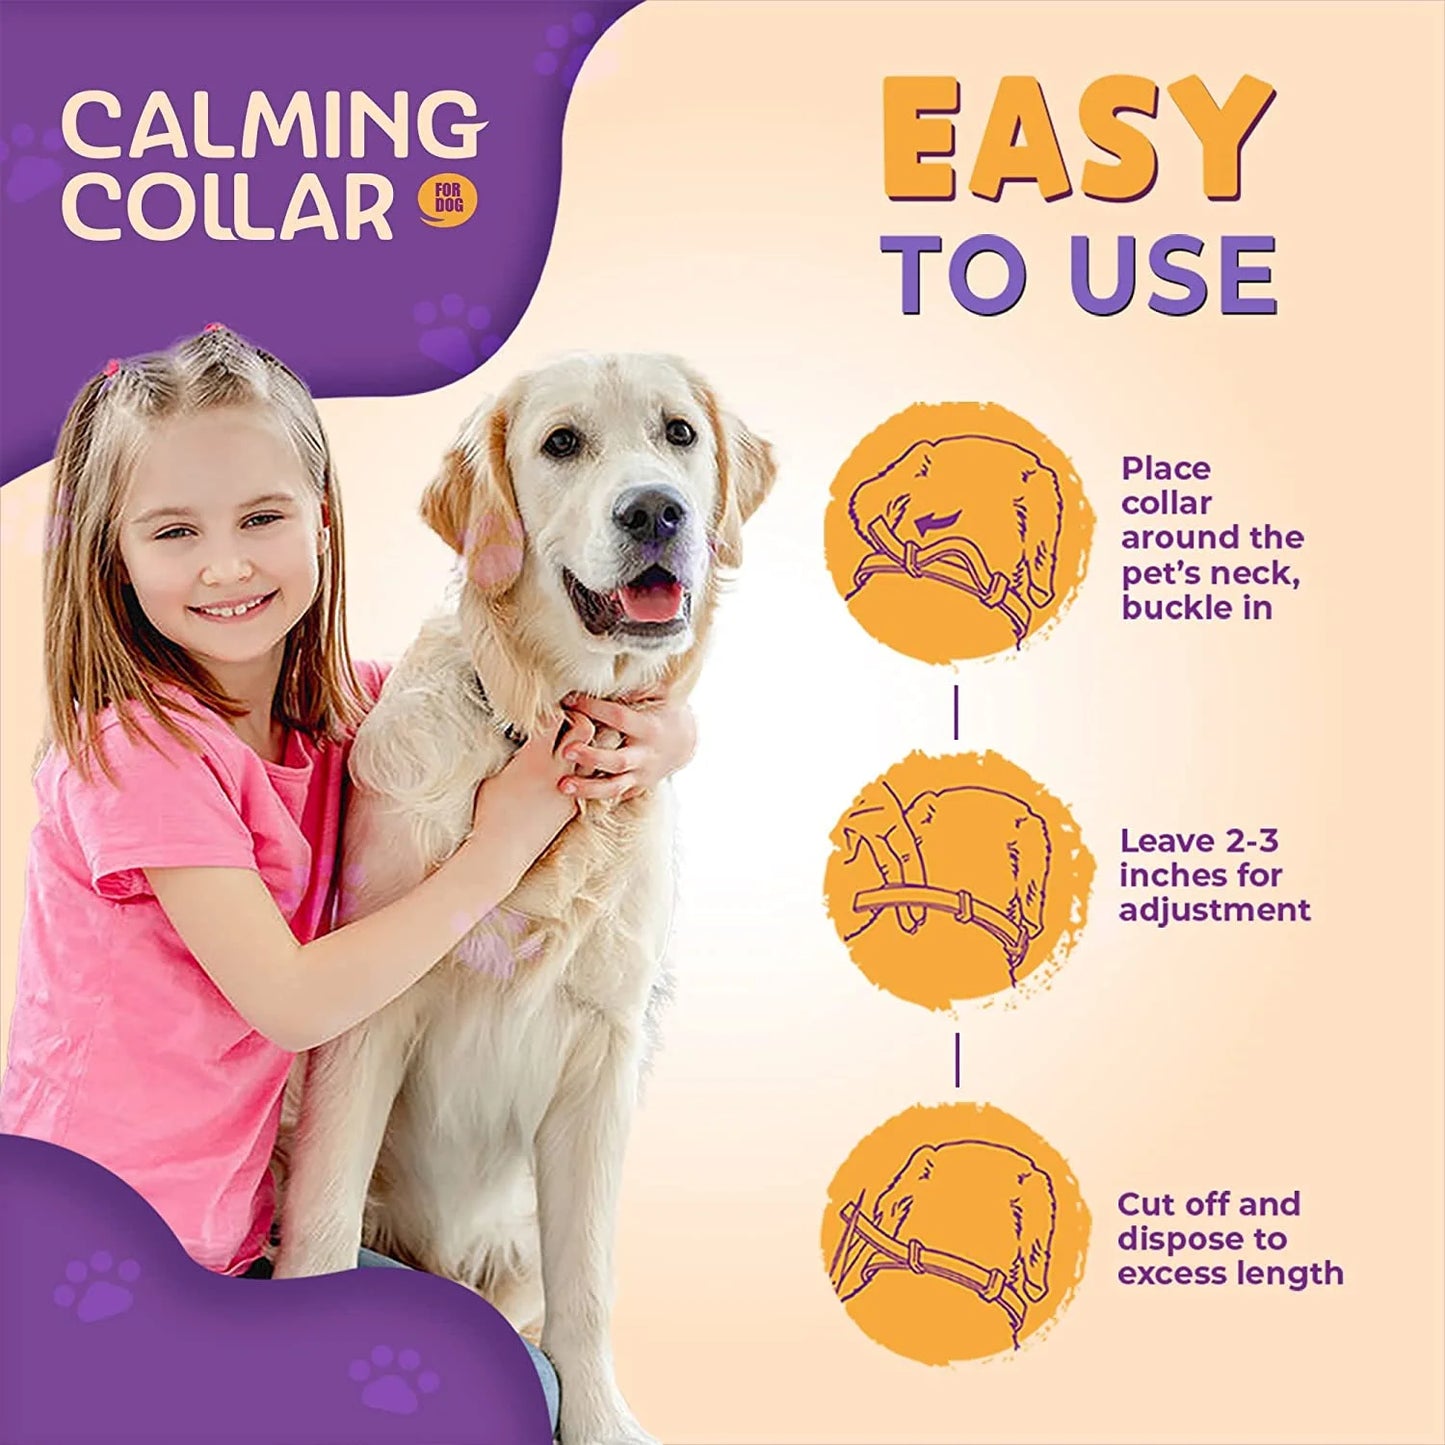 pet calming collar, easy to use, put the collar on the pet and buckle up, leave 2 - 3 inches for adjustments, cut off the excess length and dispose.